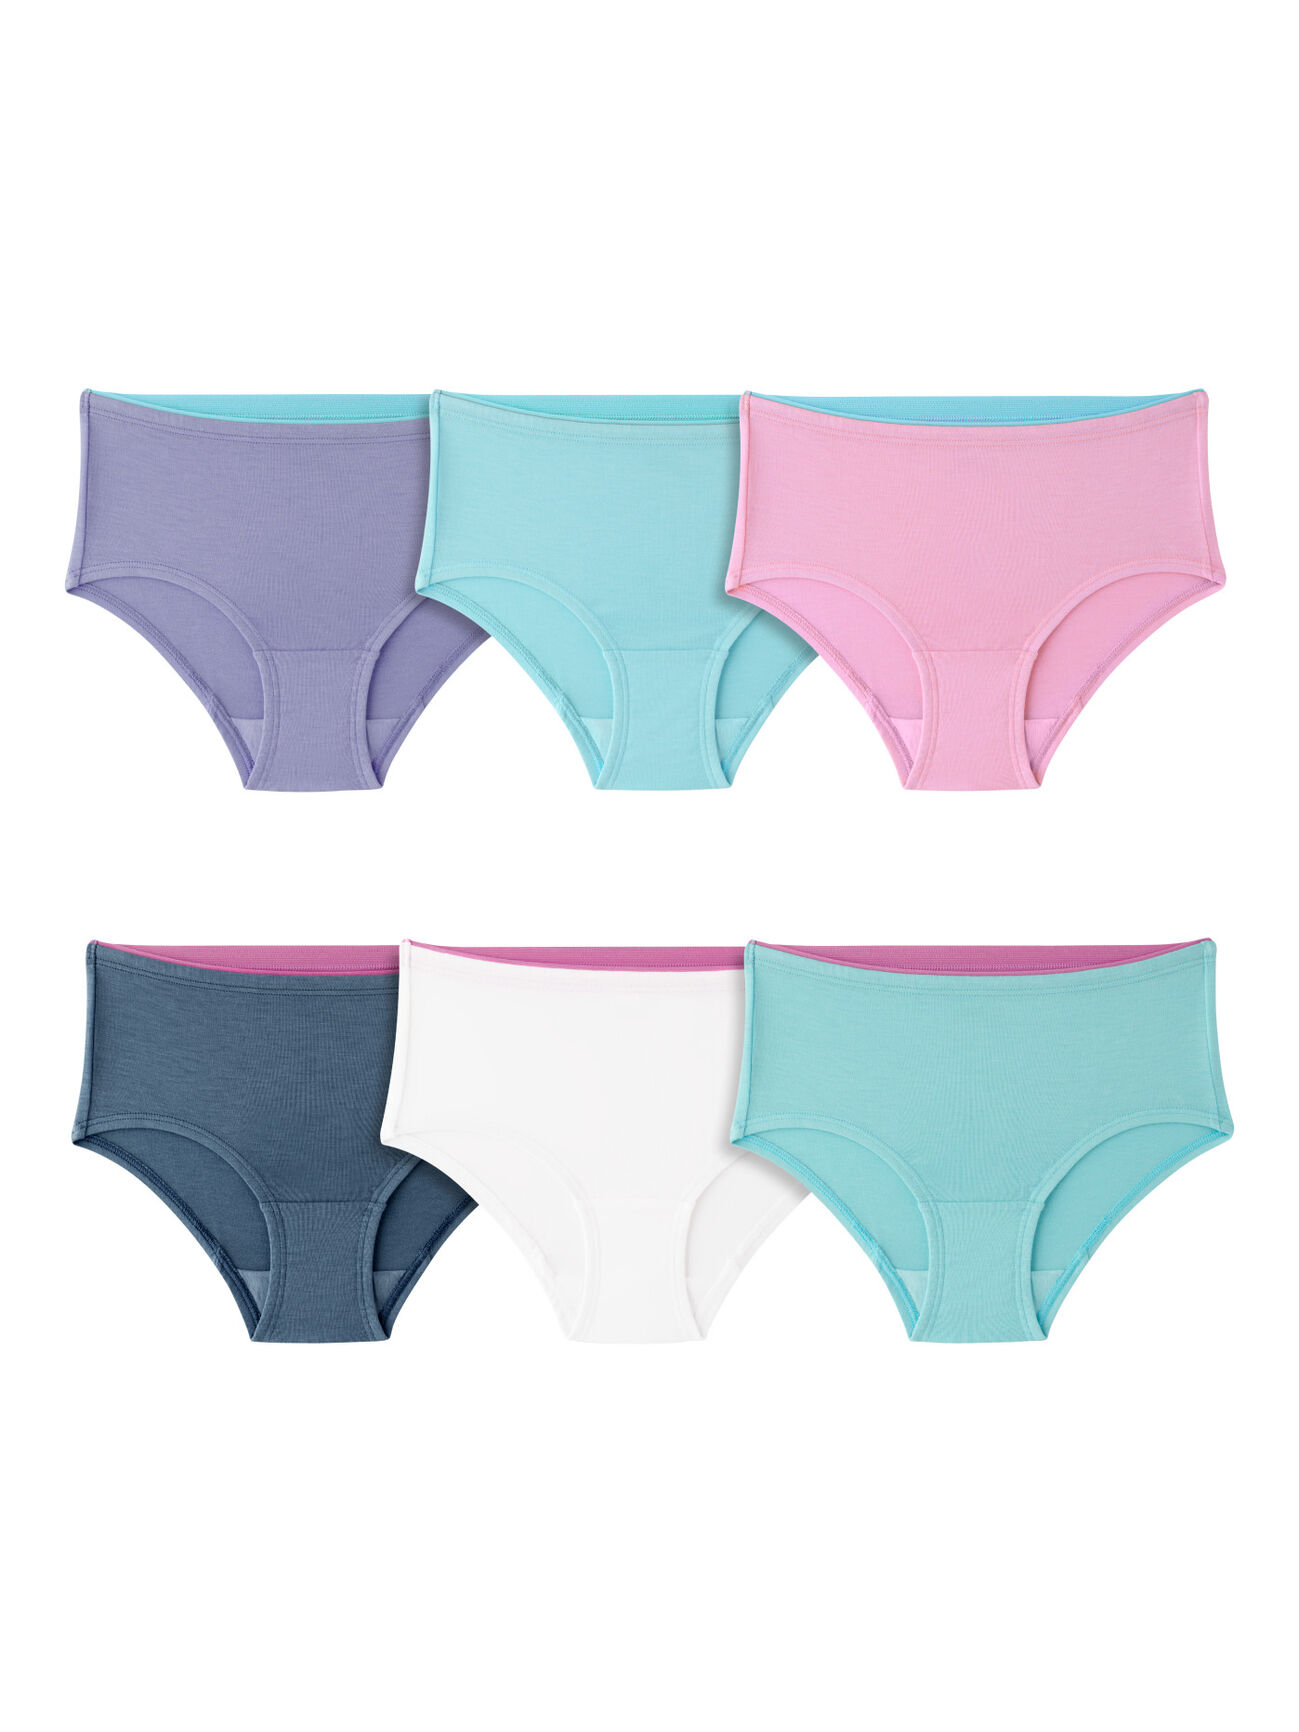 Fruit Of The Loom Women's 6pk Classic Briefs - Colors May Vary 8